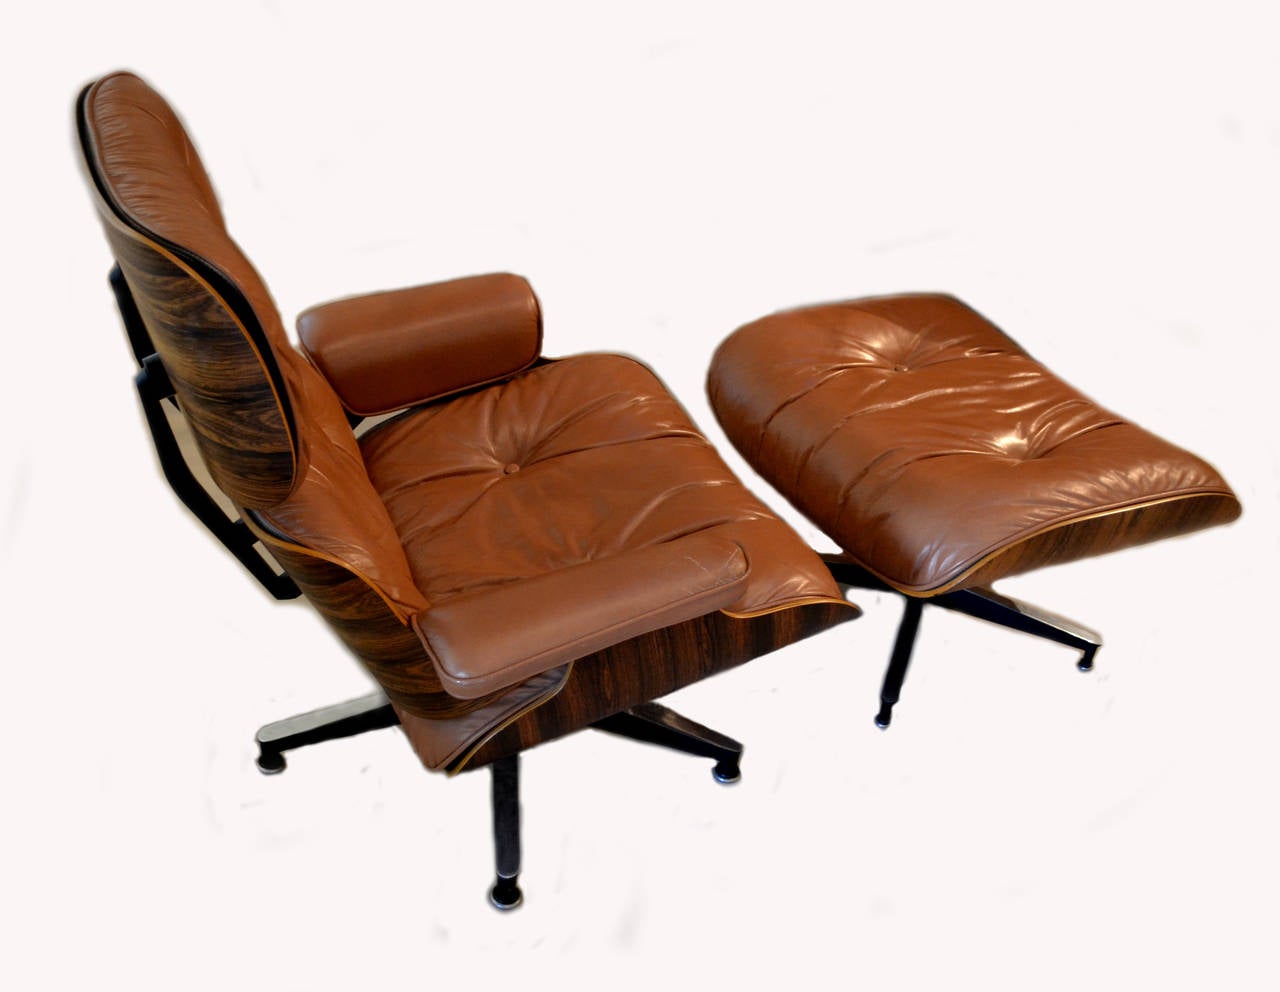 Like anything Classic, this Eames lounge chair and ottoman (circa 1973) by renowned furniture maker Herman Miller gets better with age. Both are hand-assembled with great attention to detail. The shells are 7-ply rosewood veneer and the cushions are